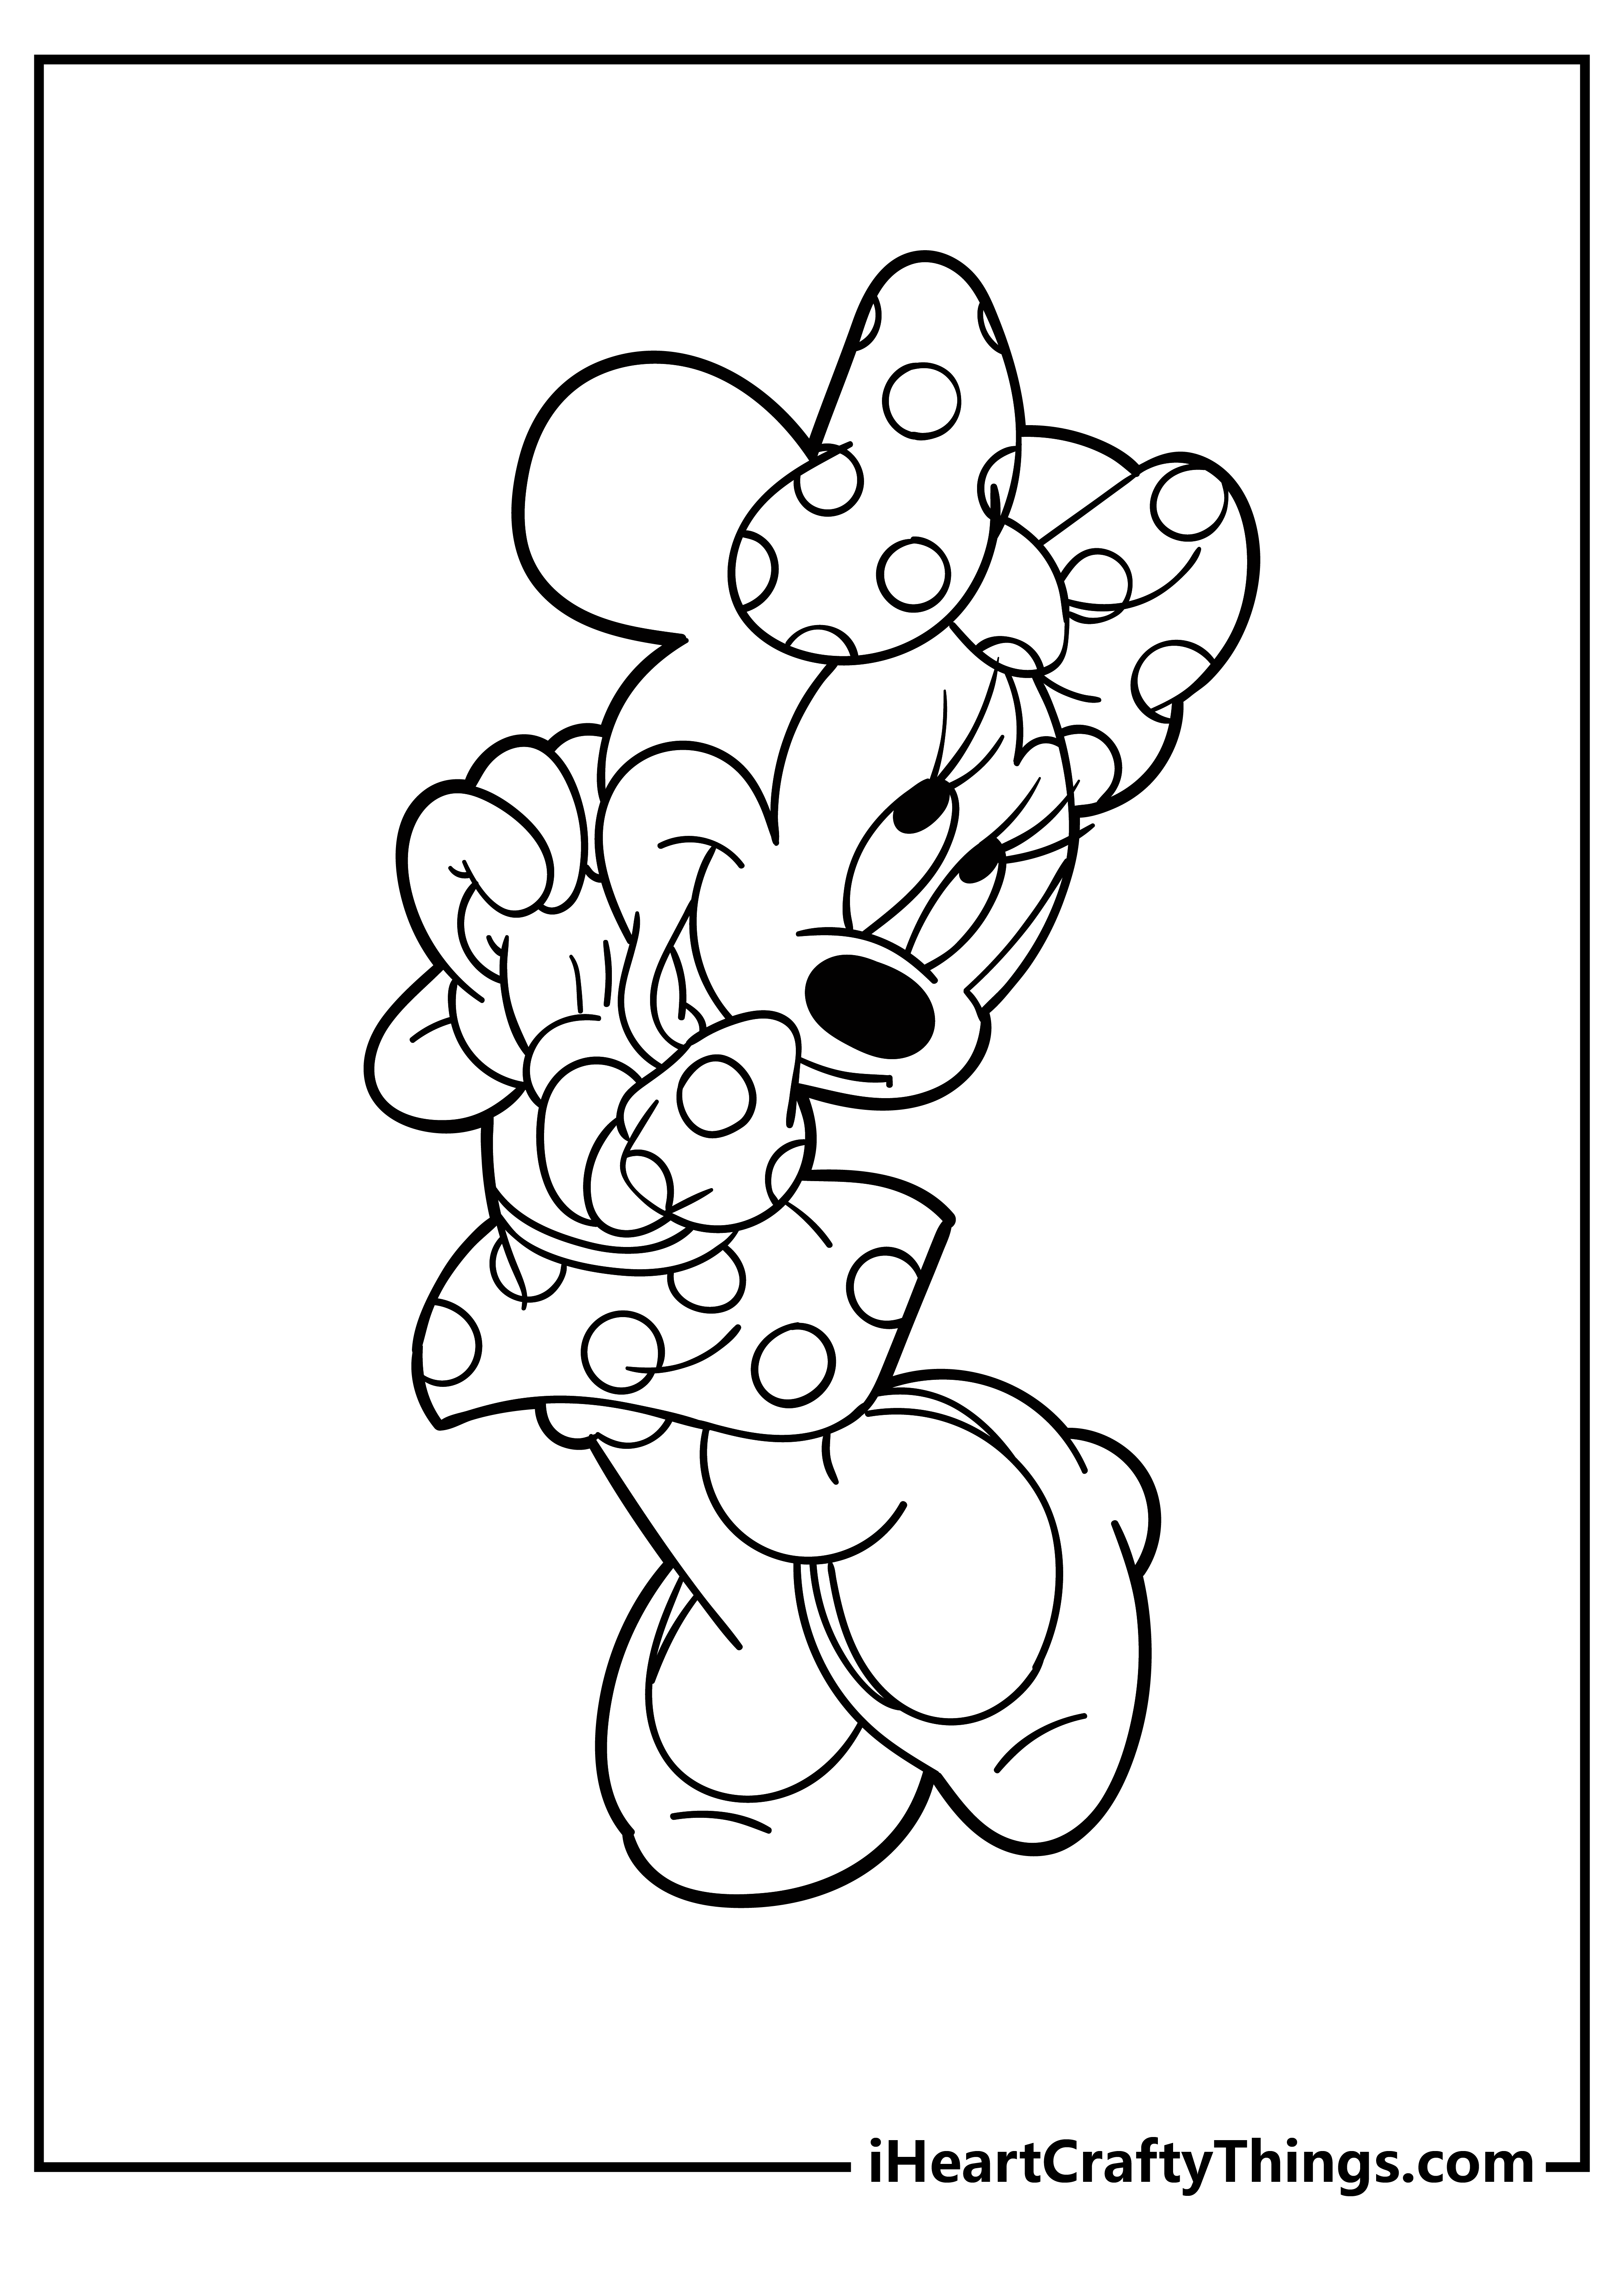 Minnie As A Baby Coloring Pages